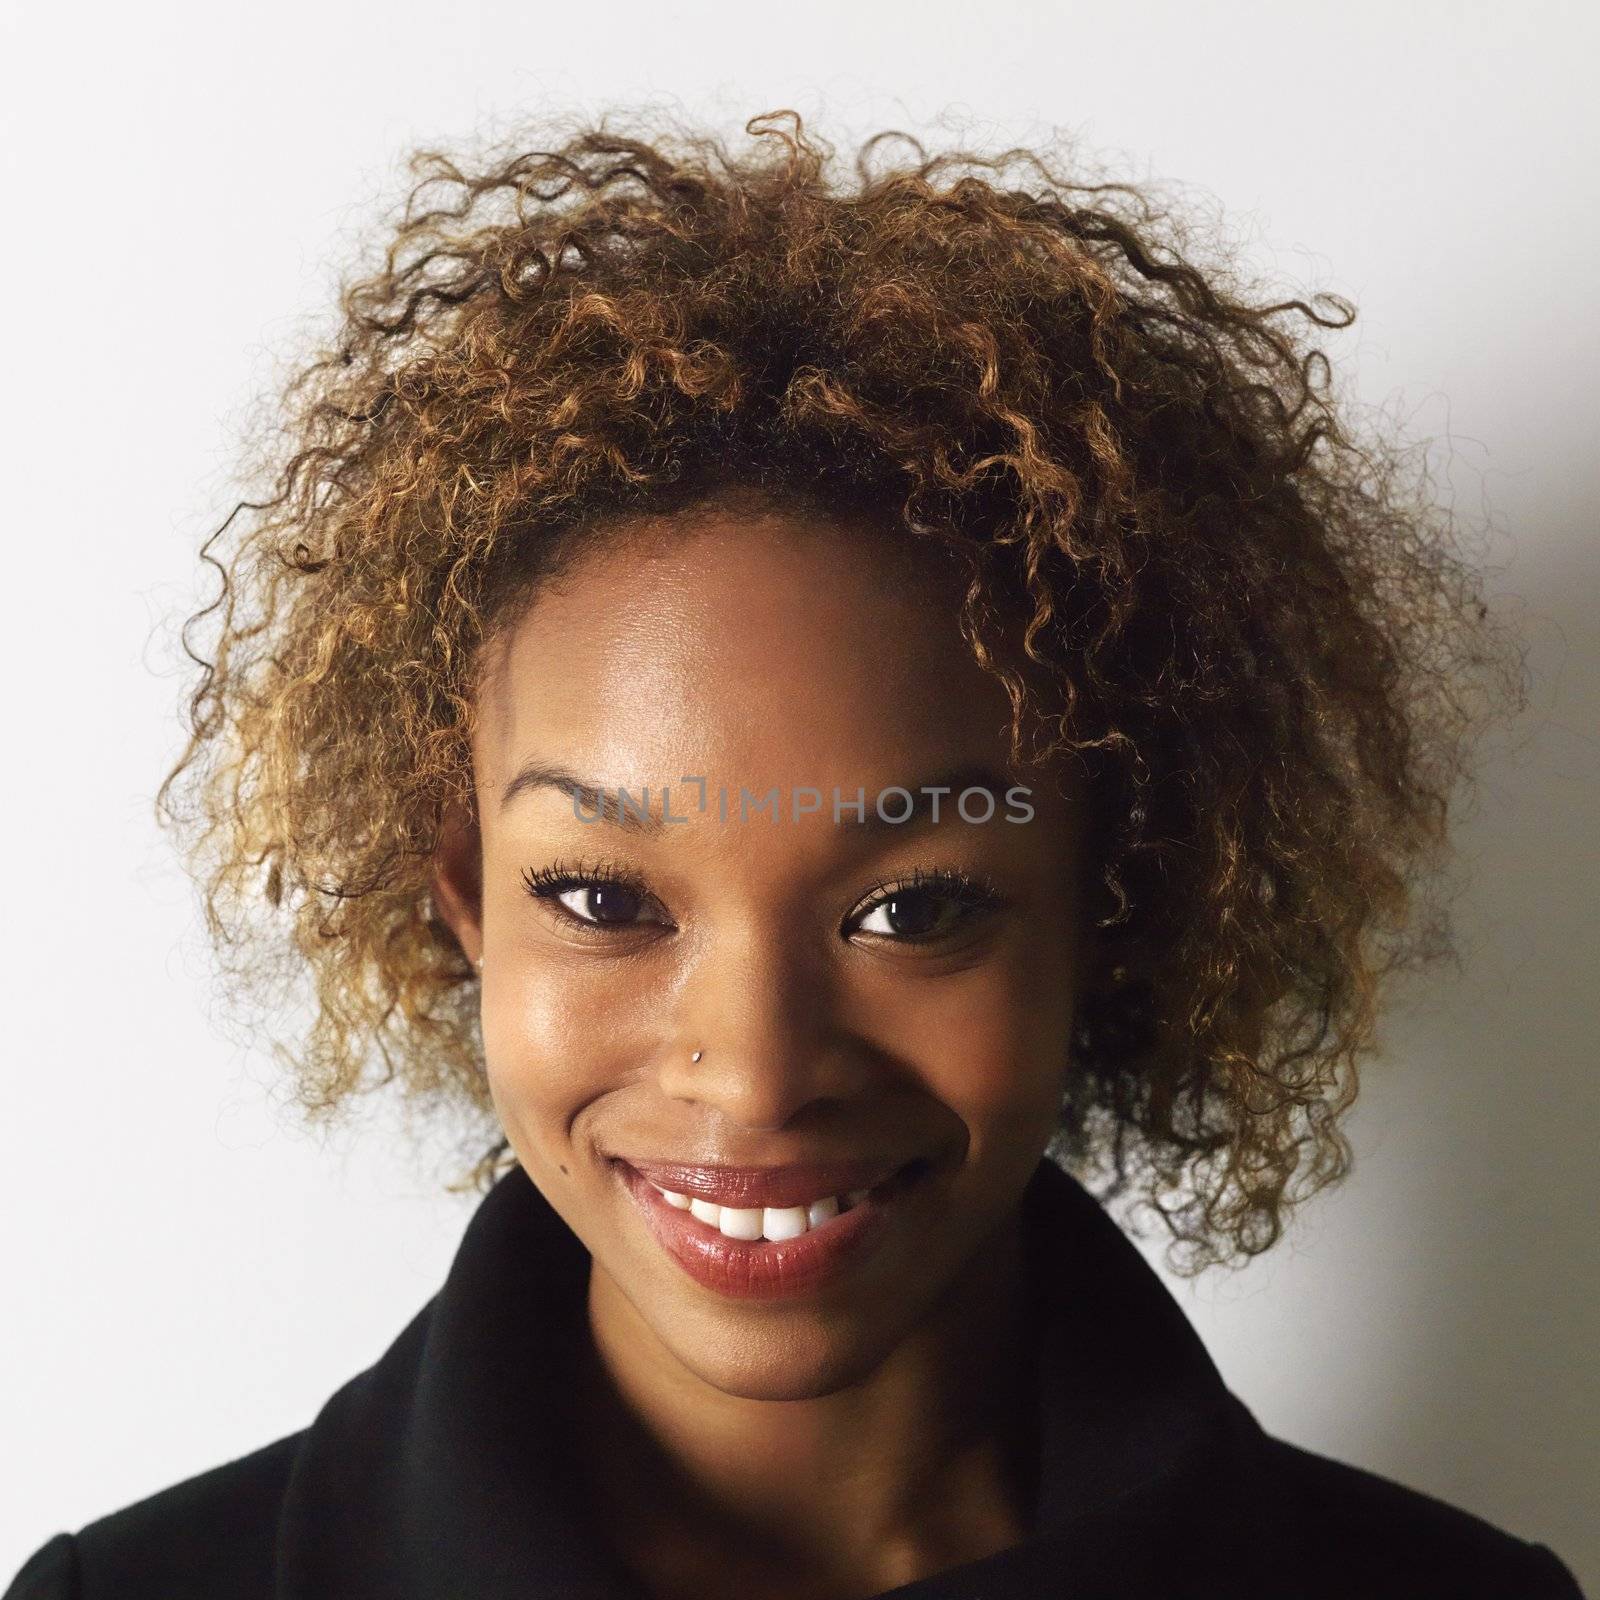 Headshot of pretty smiling young woman.